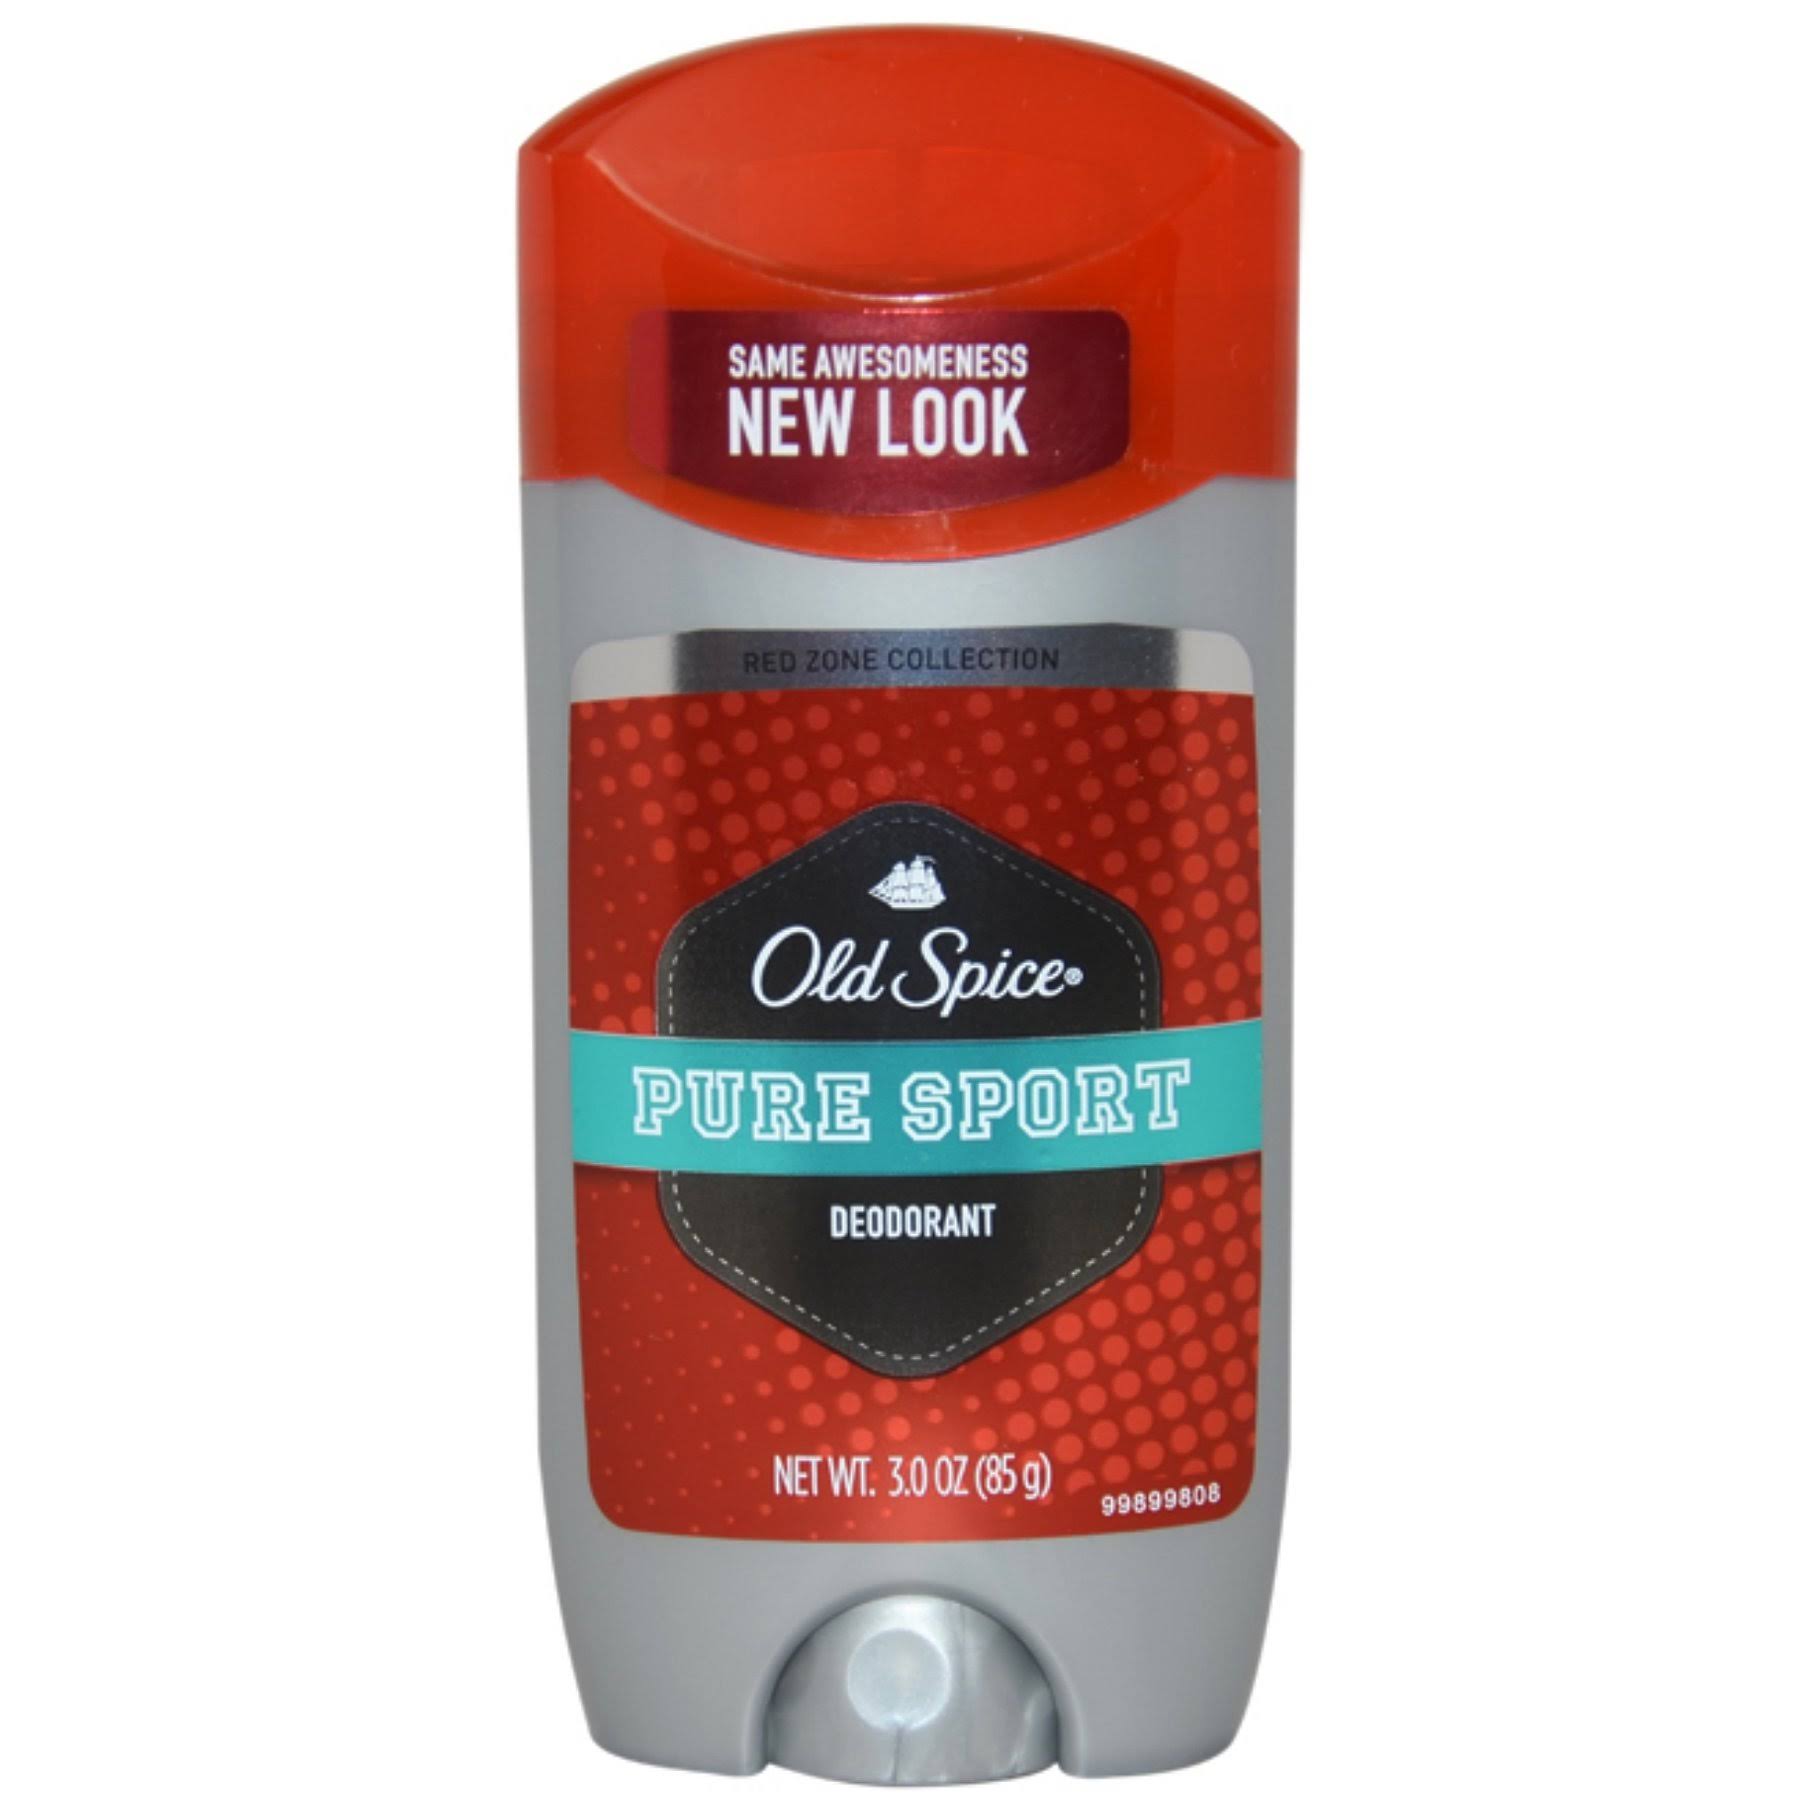 Old Spice Red Zone Collection Pure Sport Deodorant - 3oz